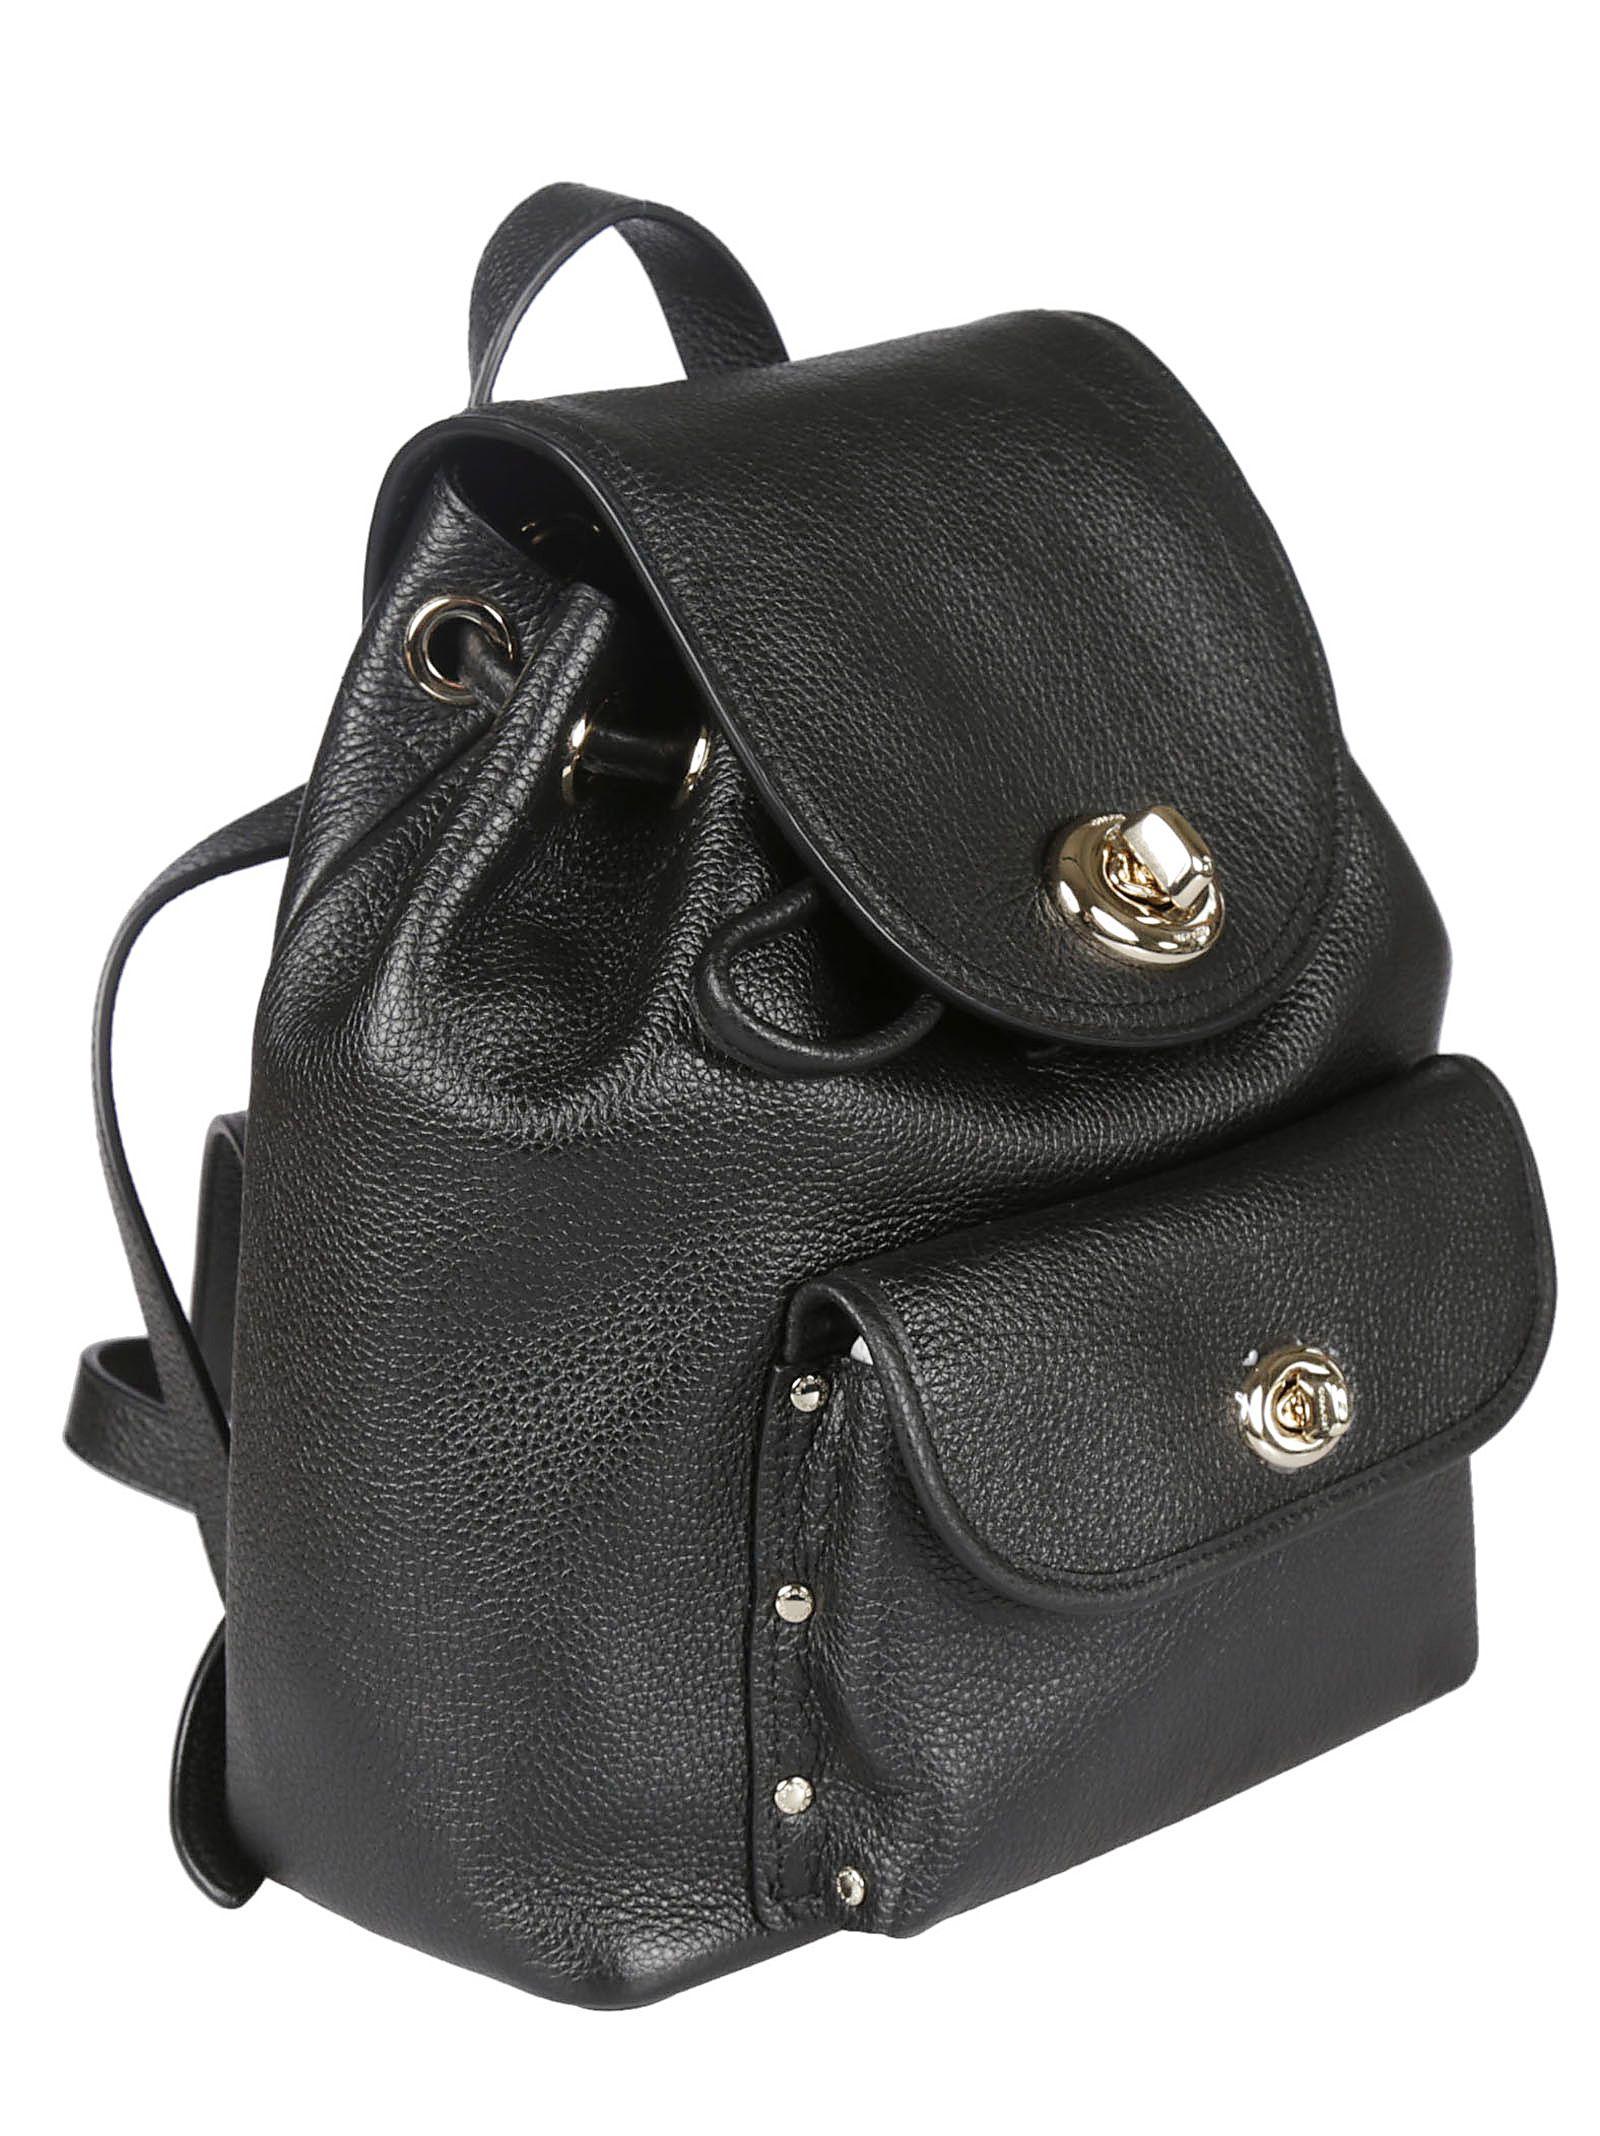 italist | Best price in the market for Coach Coach Mini Turnlock Rucksack Backpack - Black ...